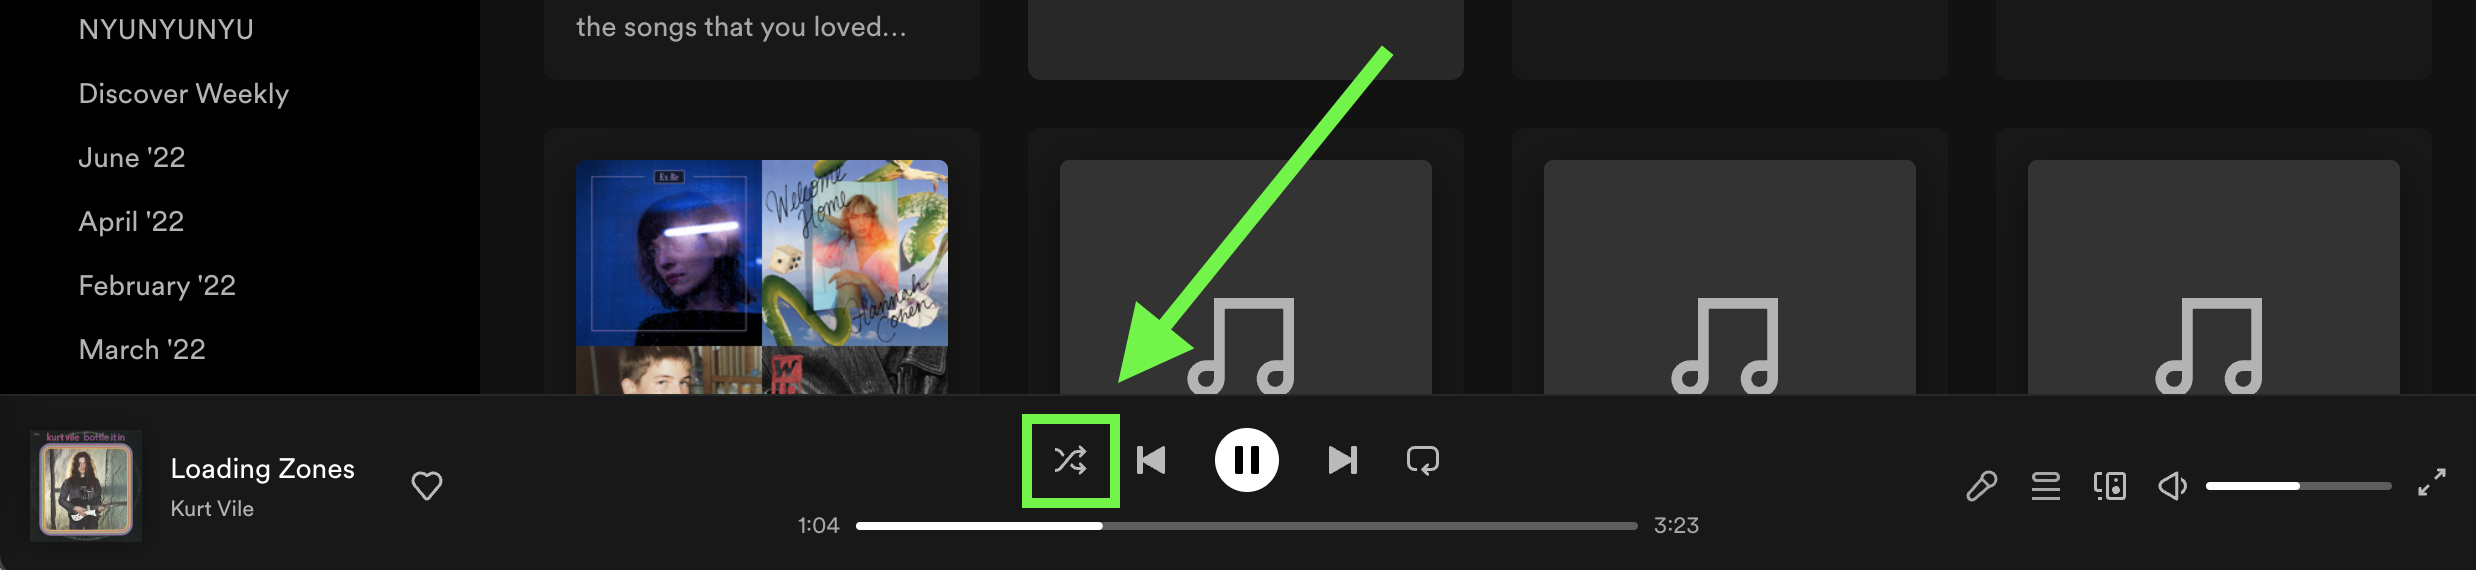 How to turn off shuffle on spotify 4